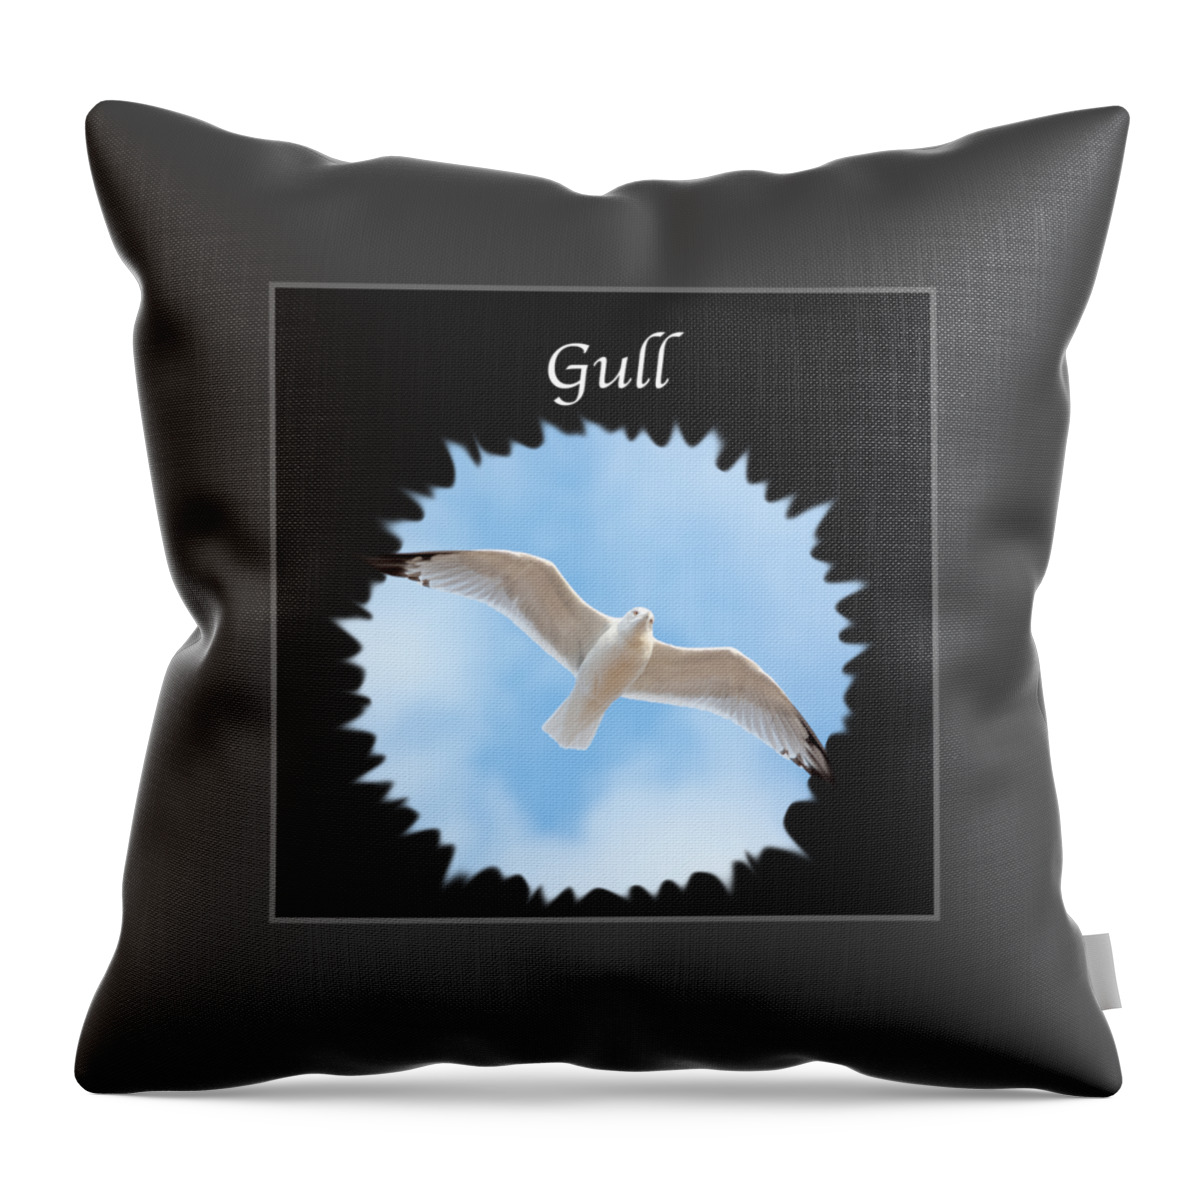 Gull Throw Pillow featuring the photograph Gull   by Holden The Moment